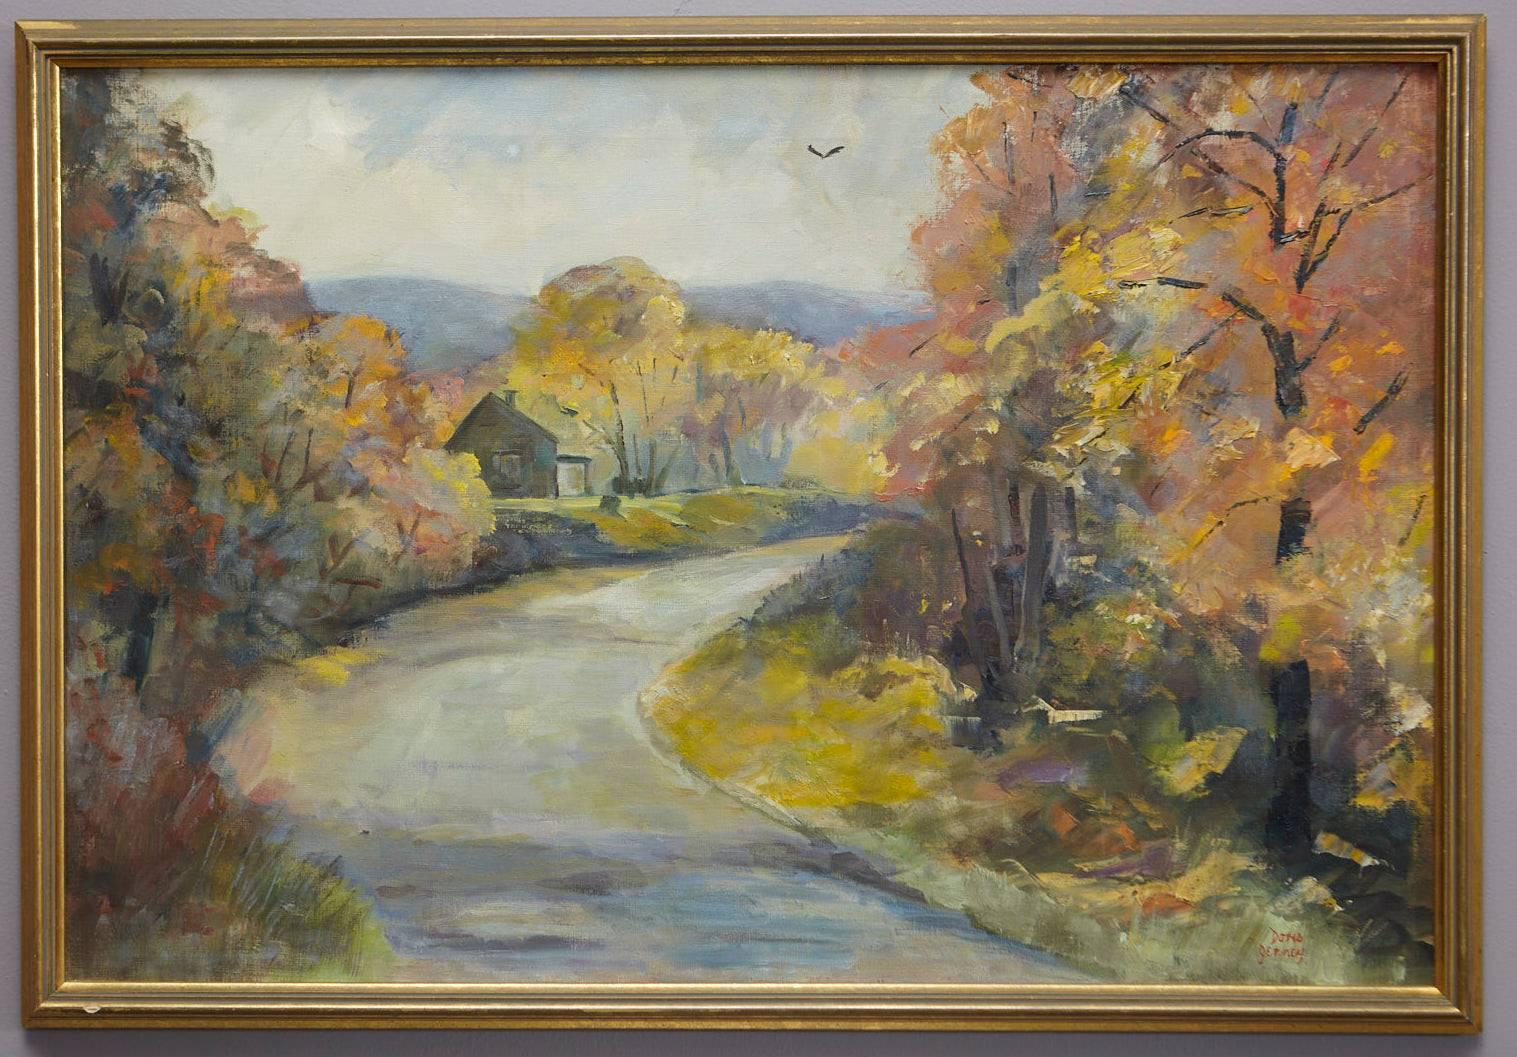 Doris Jenney, Connecticut Landscape, circa 1960s. Framed oil on canvas, signed at lower right.
Measurements: with frame H 22 x W 32, sight H 20.5 x W 30.5

Doris Jenney (American 1912 - 1996) was a painter. Her husband, Robert 'Bob' Jenney, was a